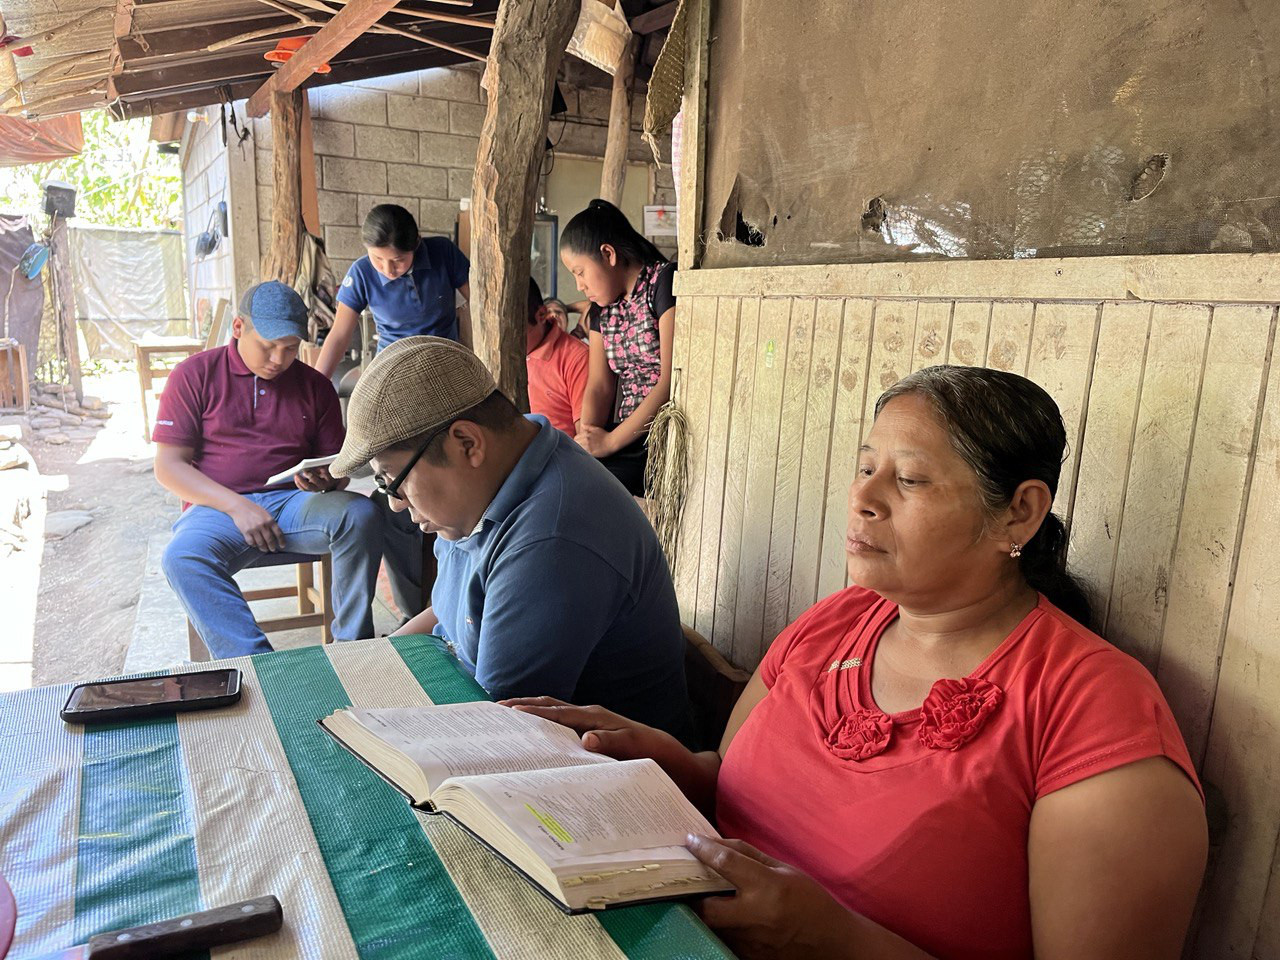 MEXICO | JUN. 20, 2022 — Family Rejected by Community for Following Christ